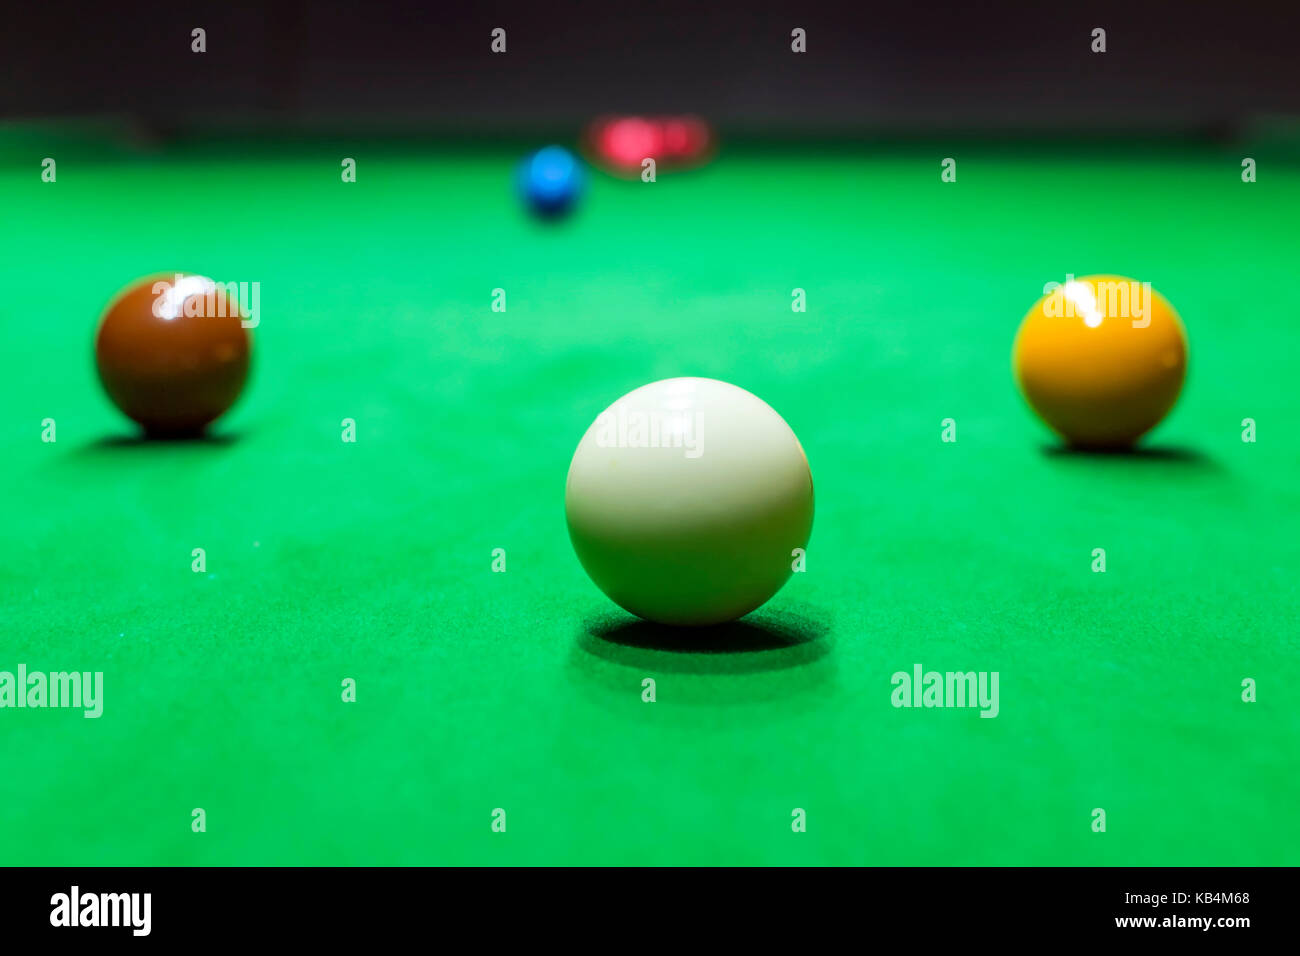 Snooker table and snooker ball Stock Photo